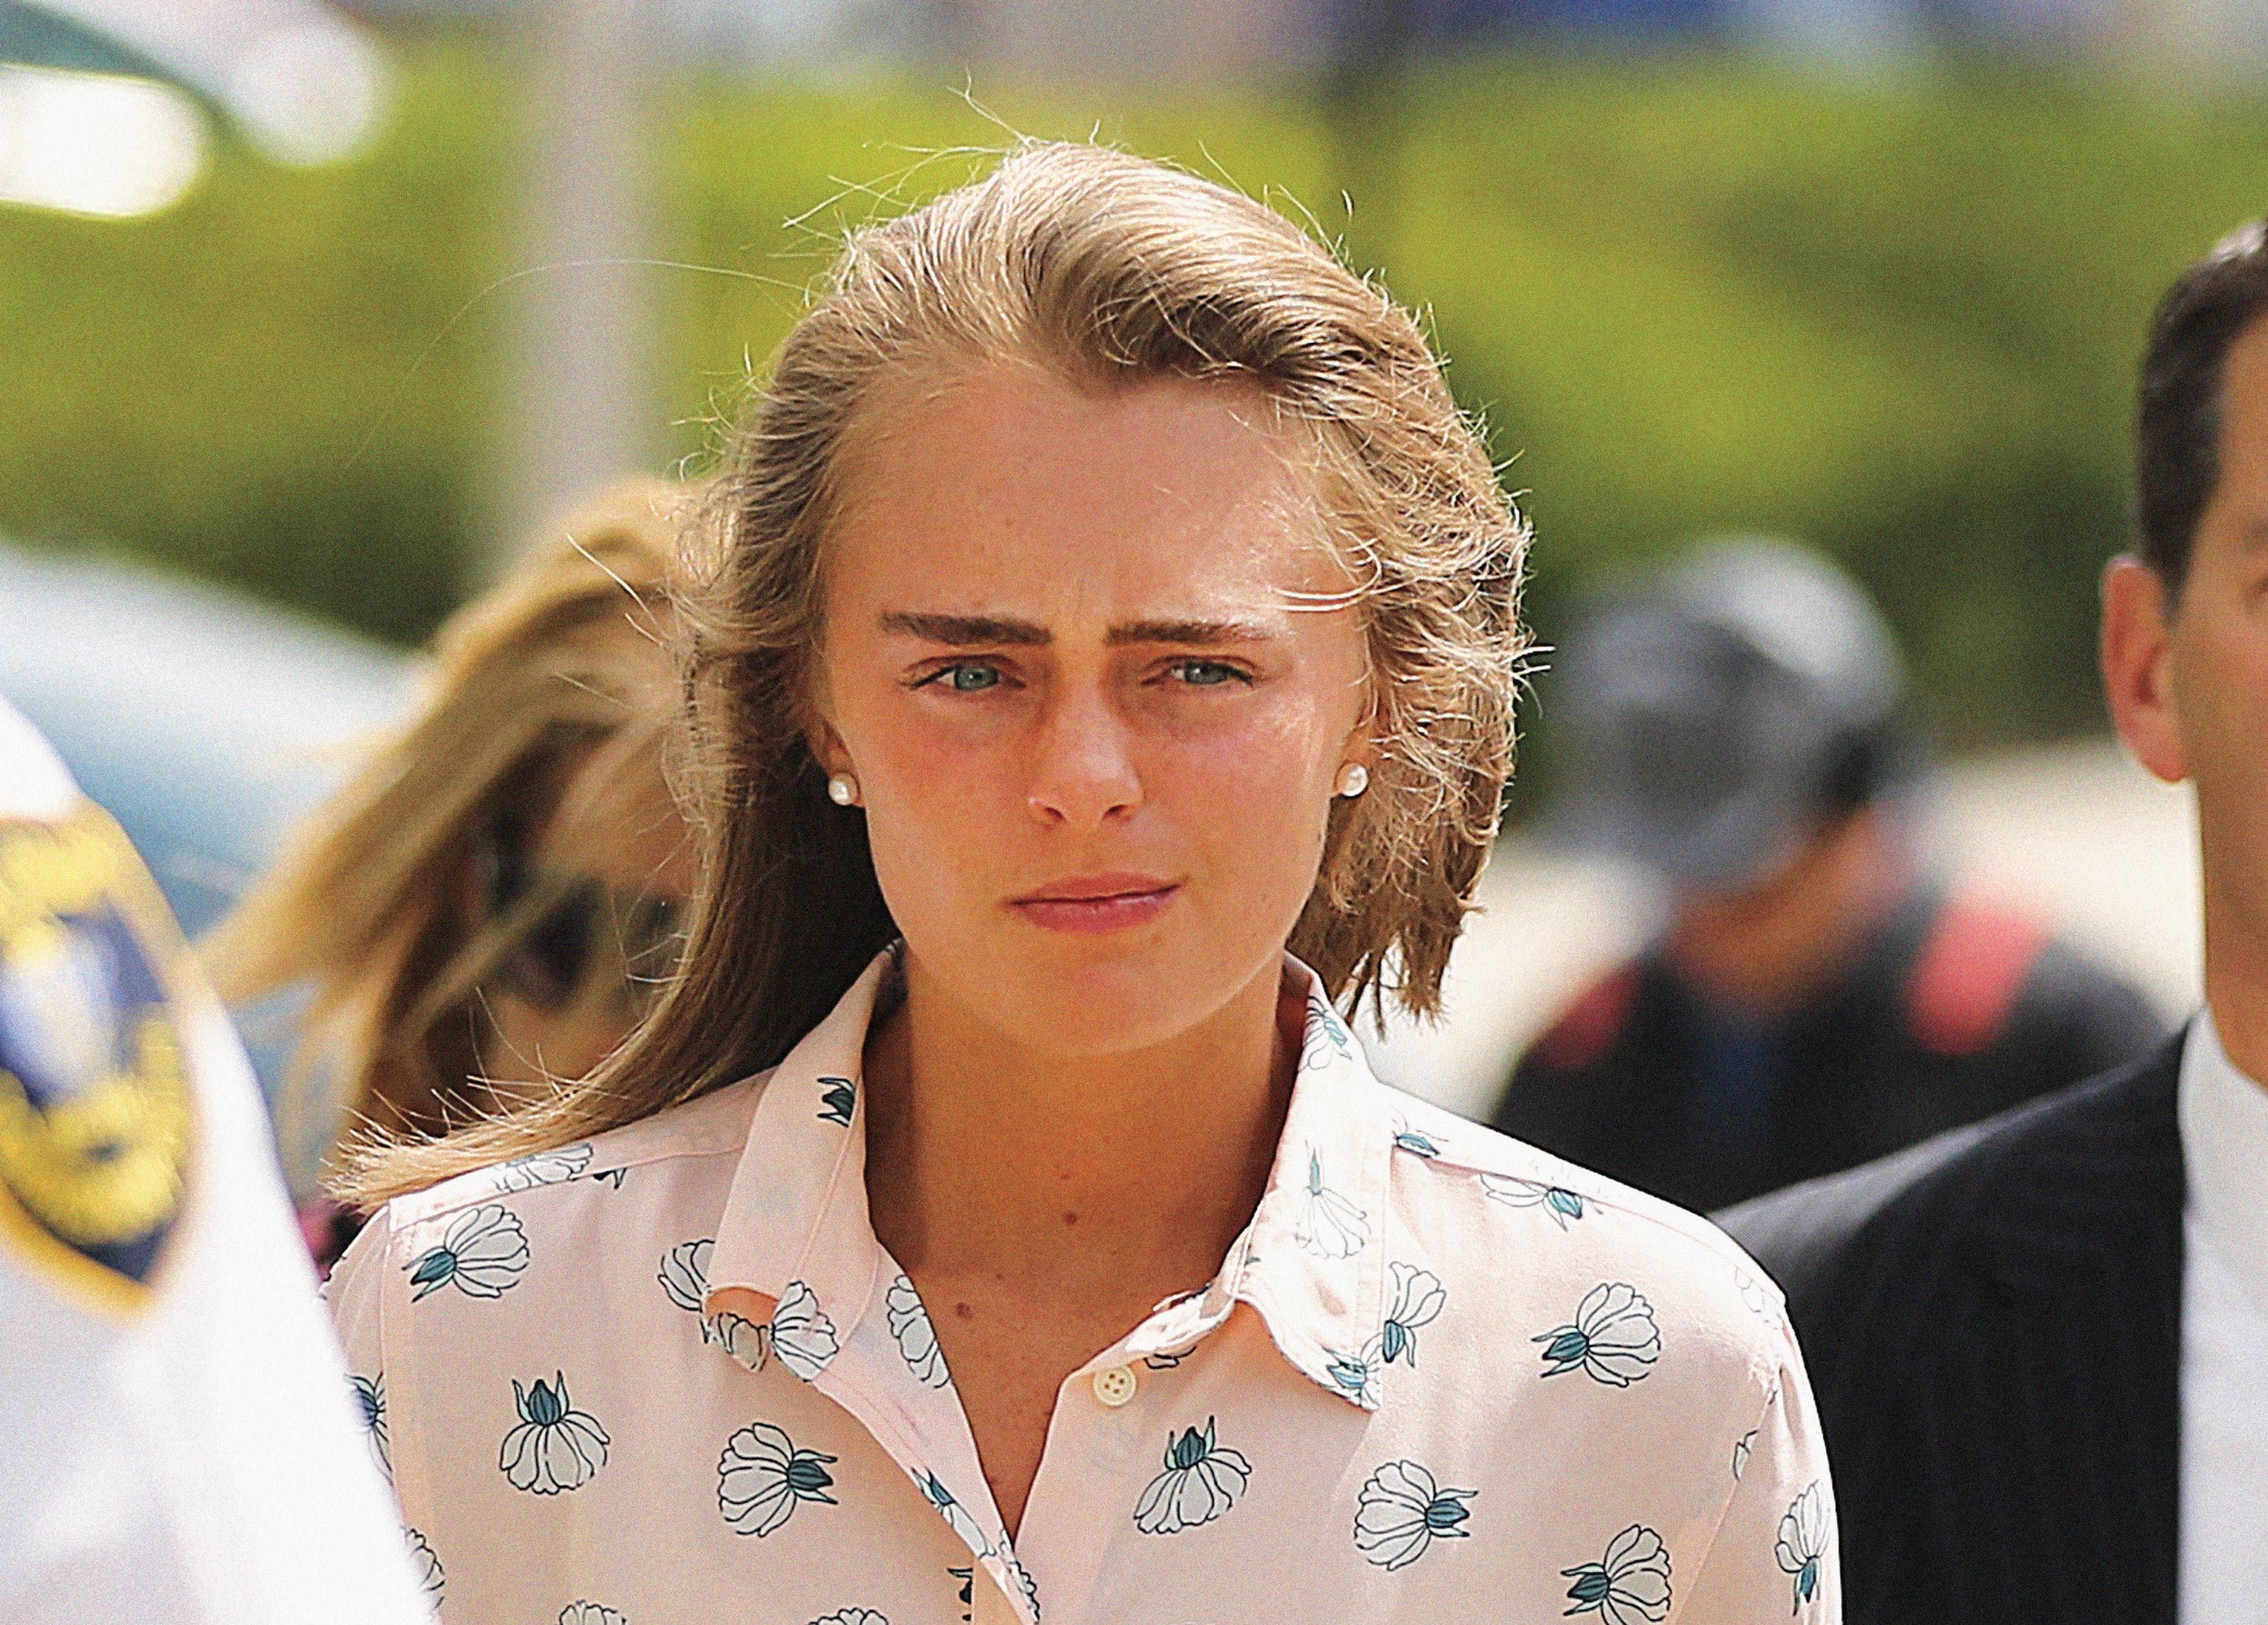 Behind the Scenes of the Michelle Carter Verdict photo